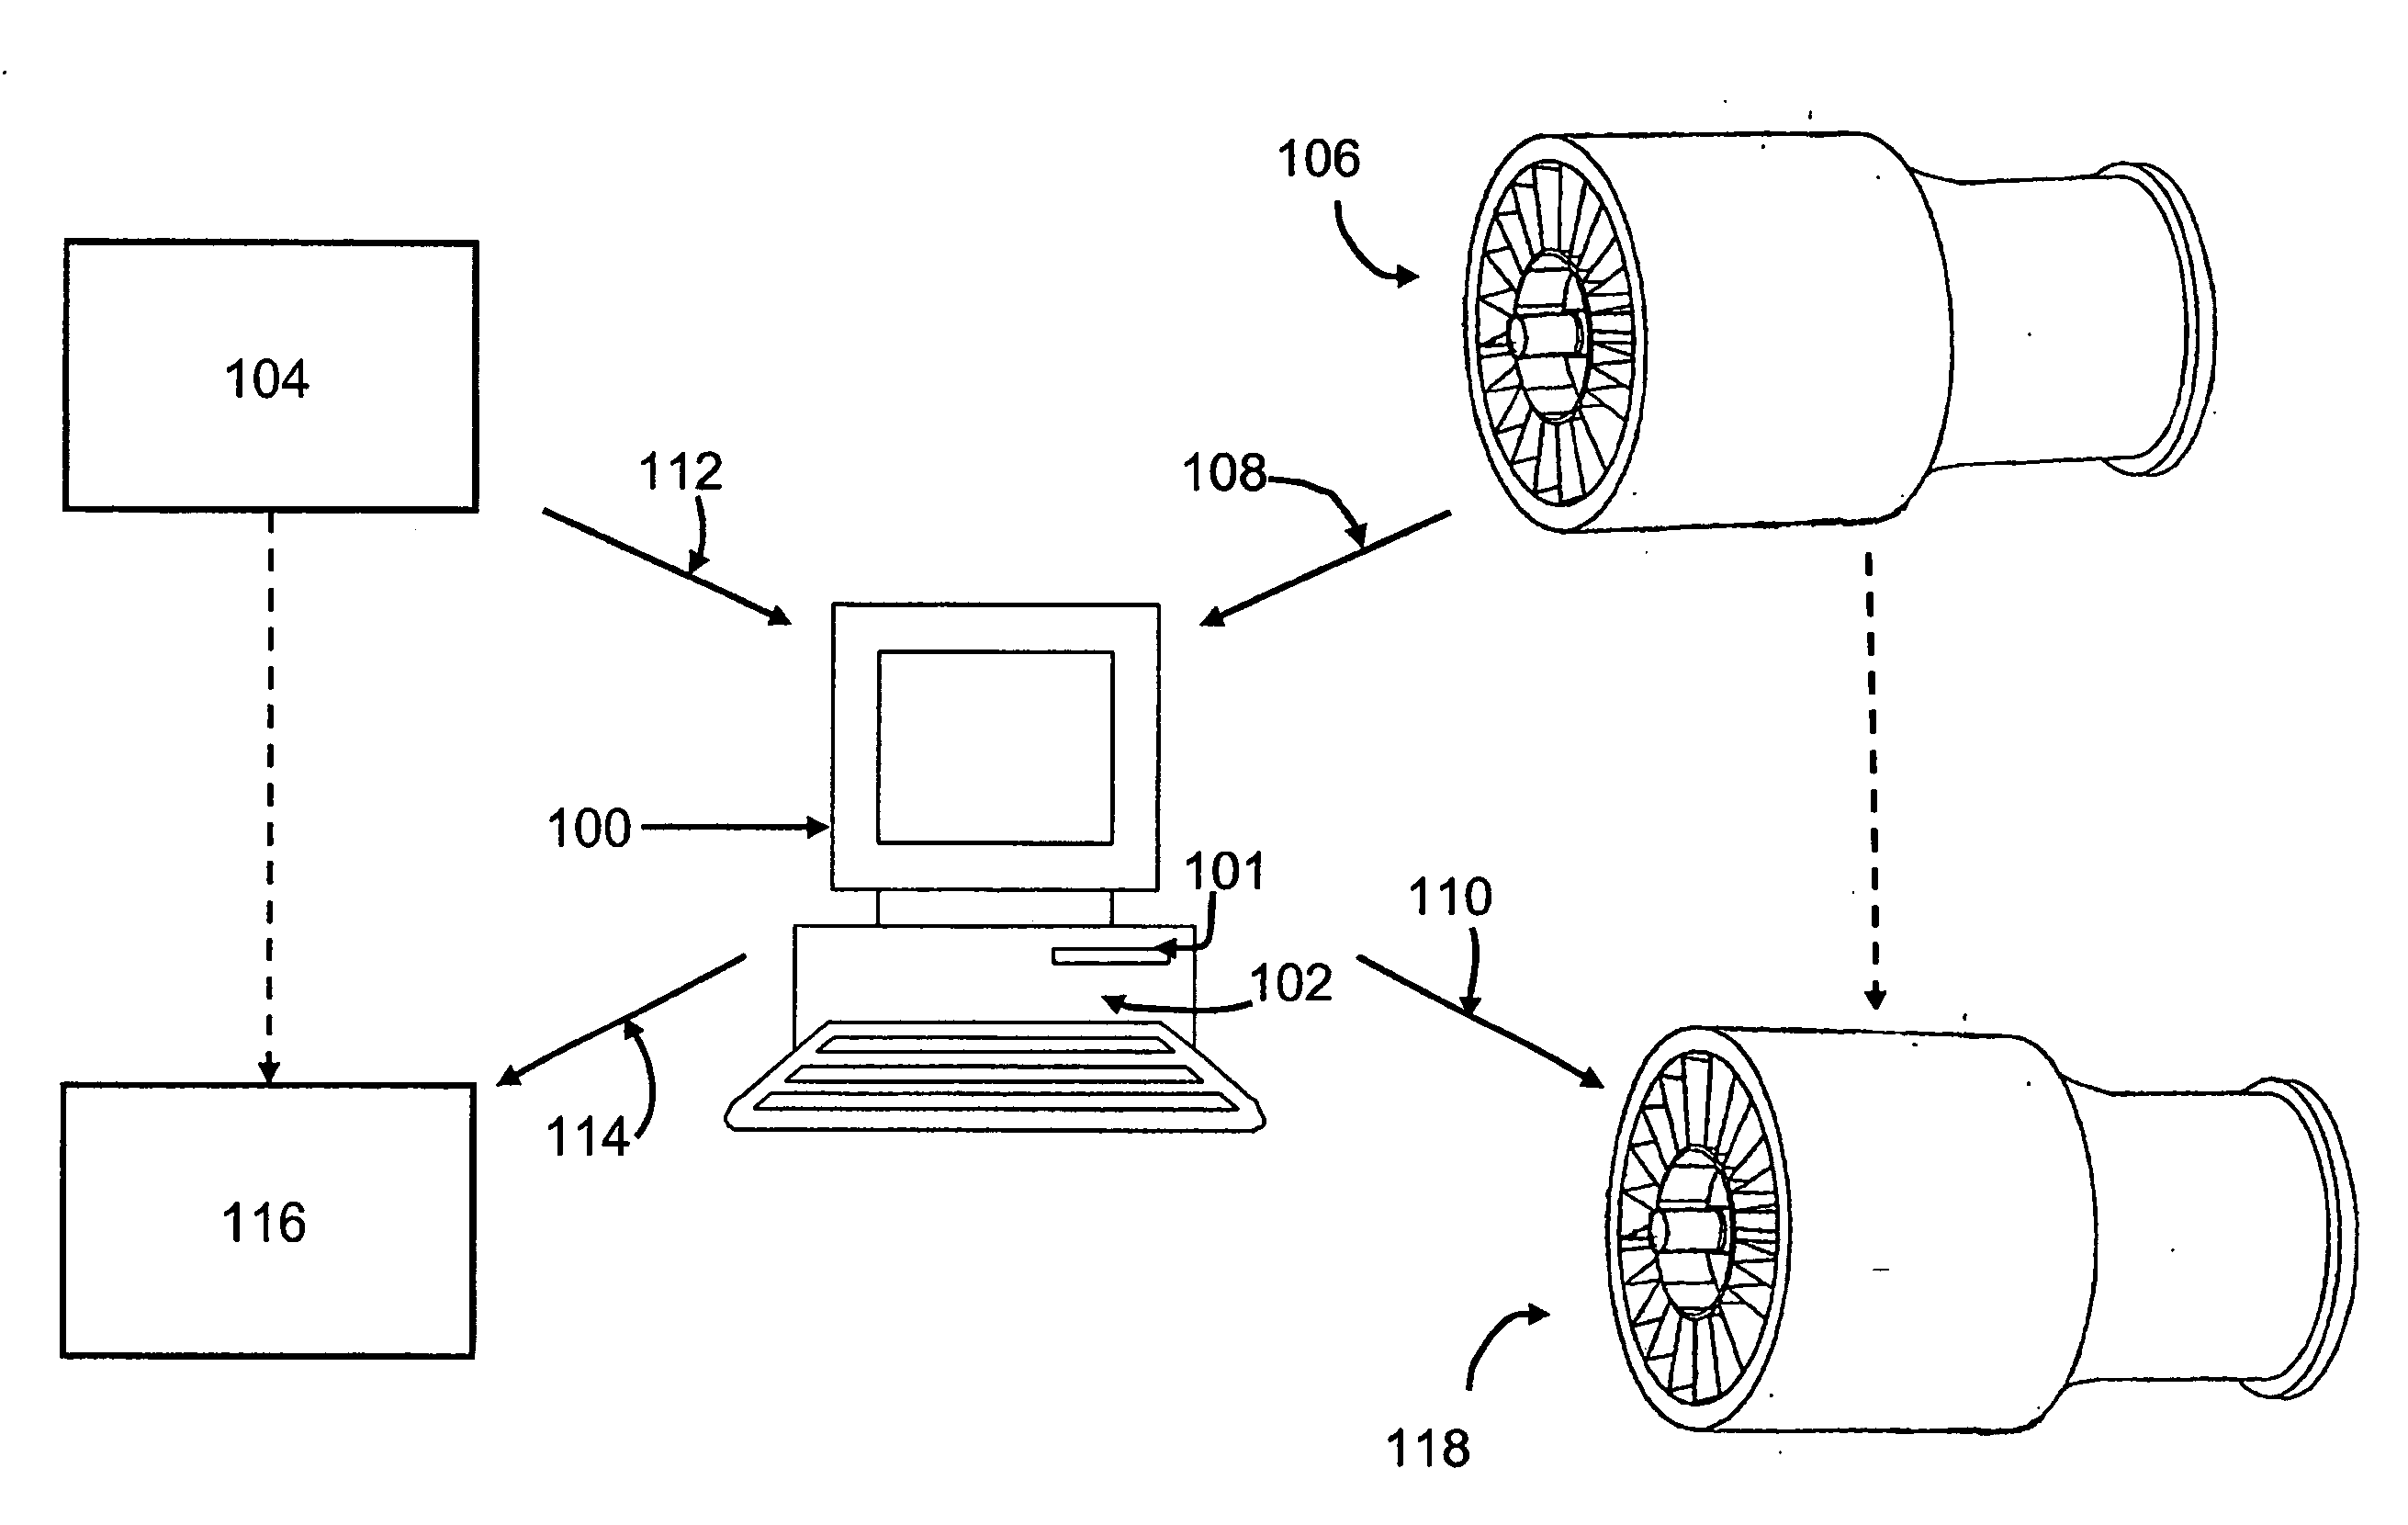 Process and system for multi-objective global optimization of maintenance schedules